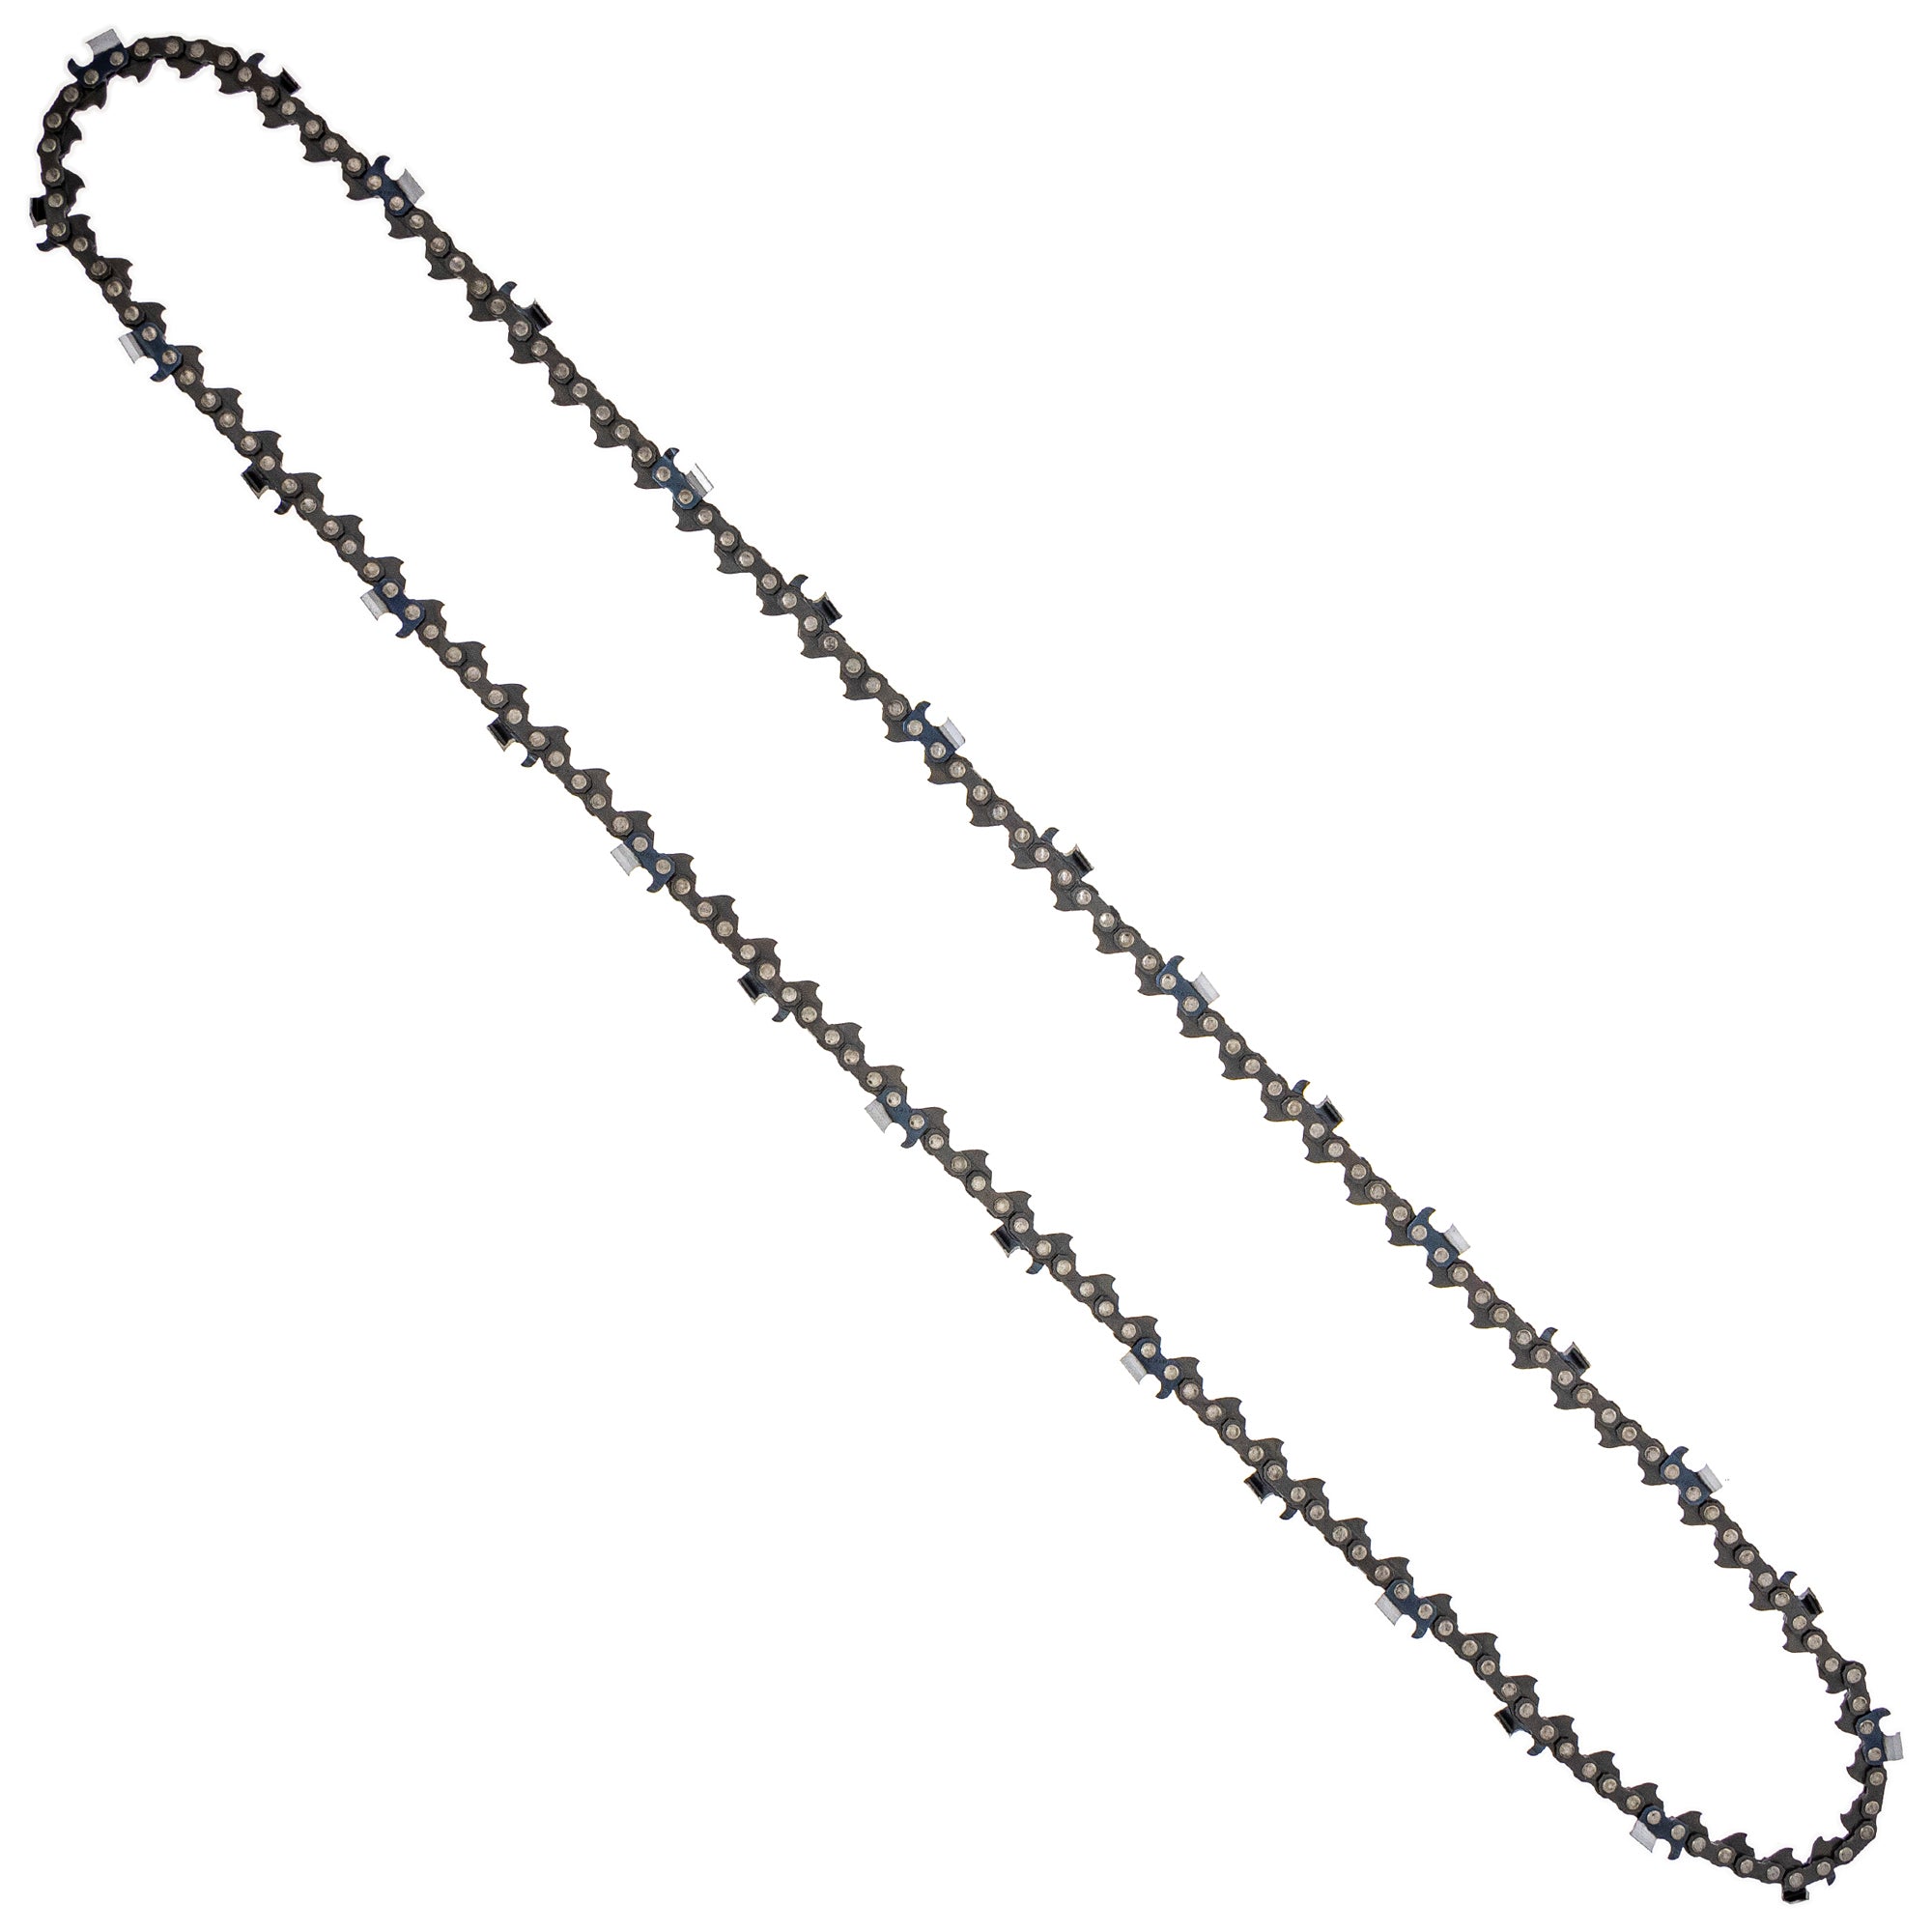 8TEN 810-CCC2207H Chain 2-Pack for zOTHER Oregon MS 066 064 056